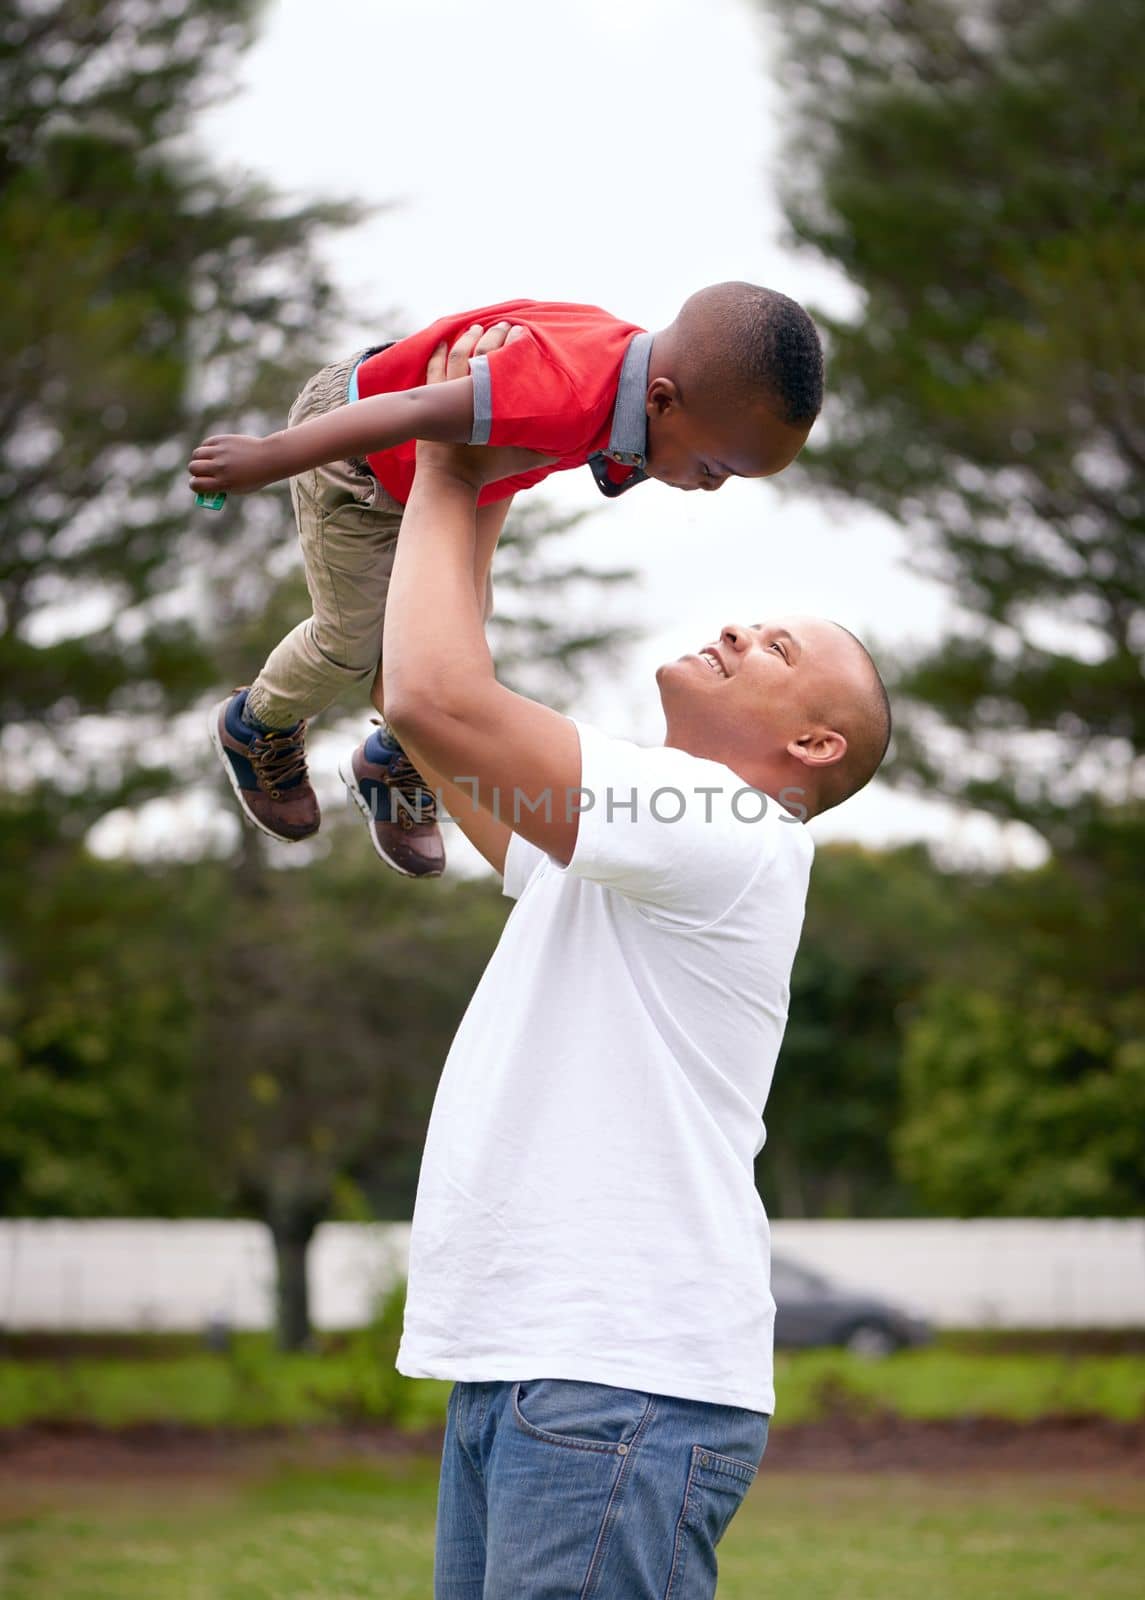 Every minute with him is priceless. a man spending time with his son outdoors